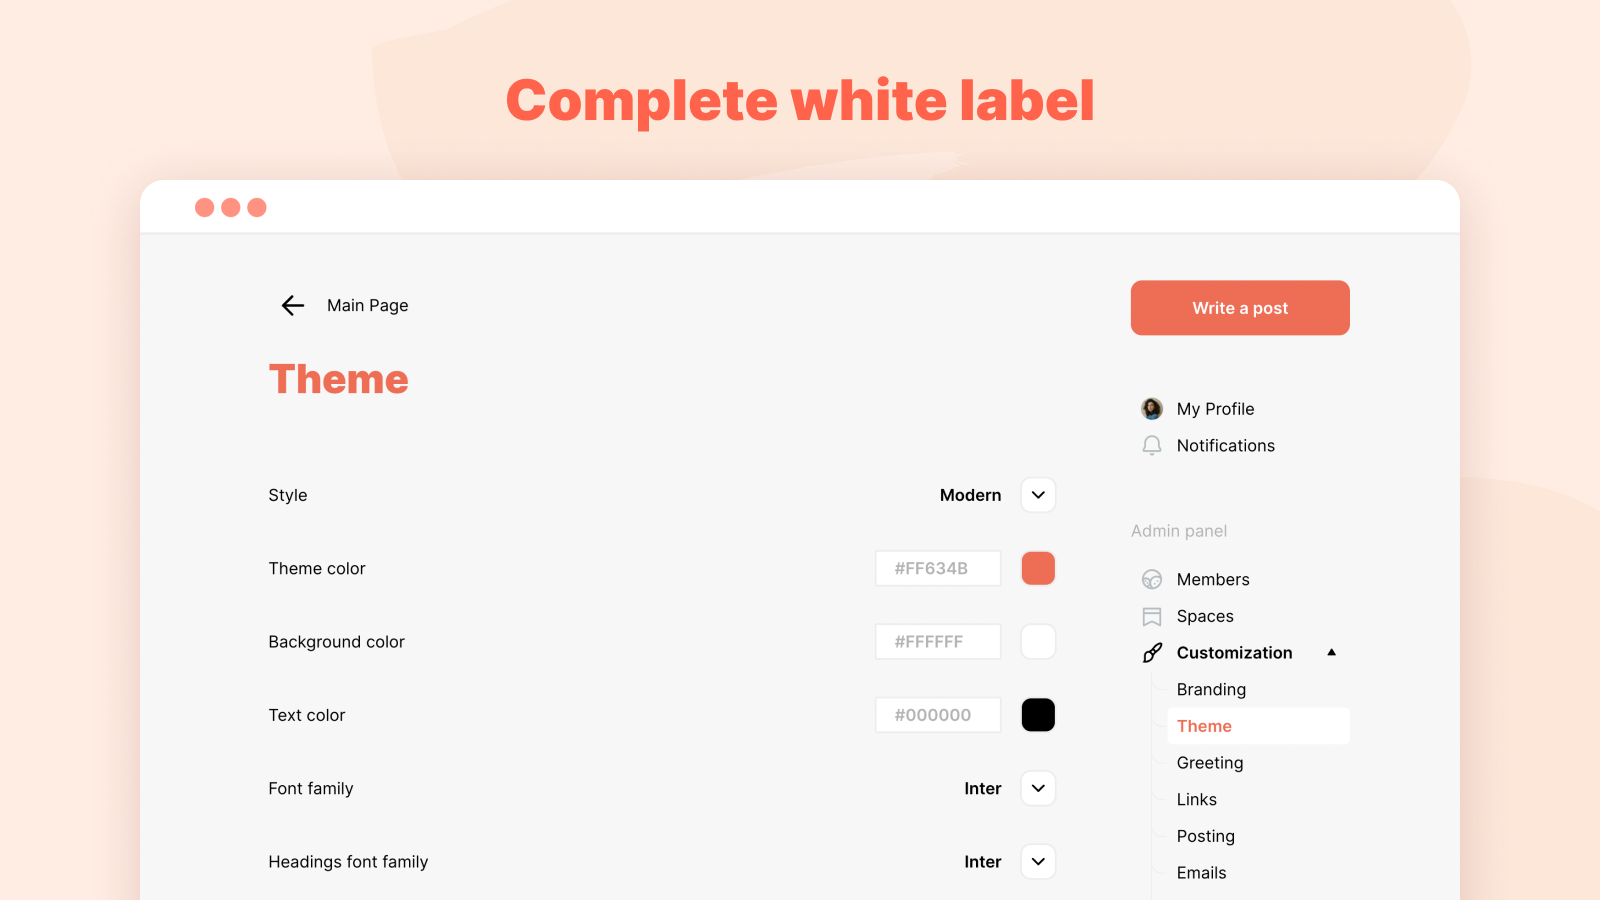 Complete white label. Add custom colors, logos, categories, and topics to deliver a fully branded experience for every user.